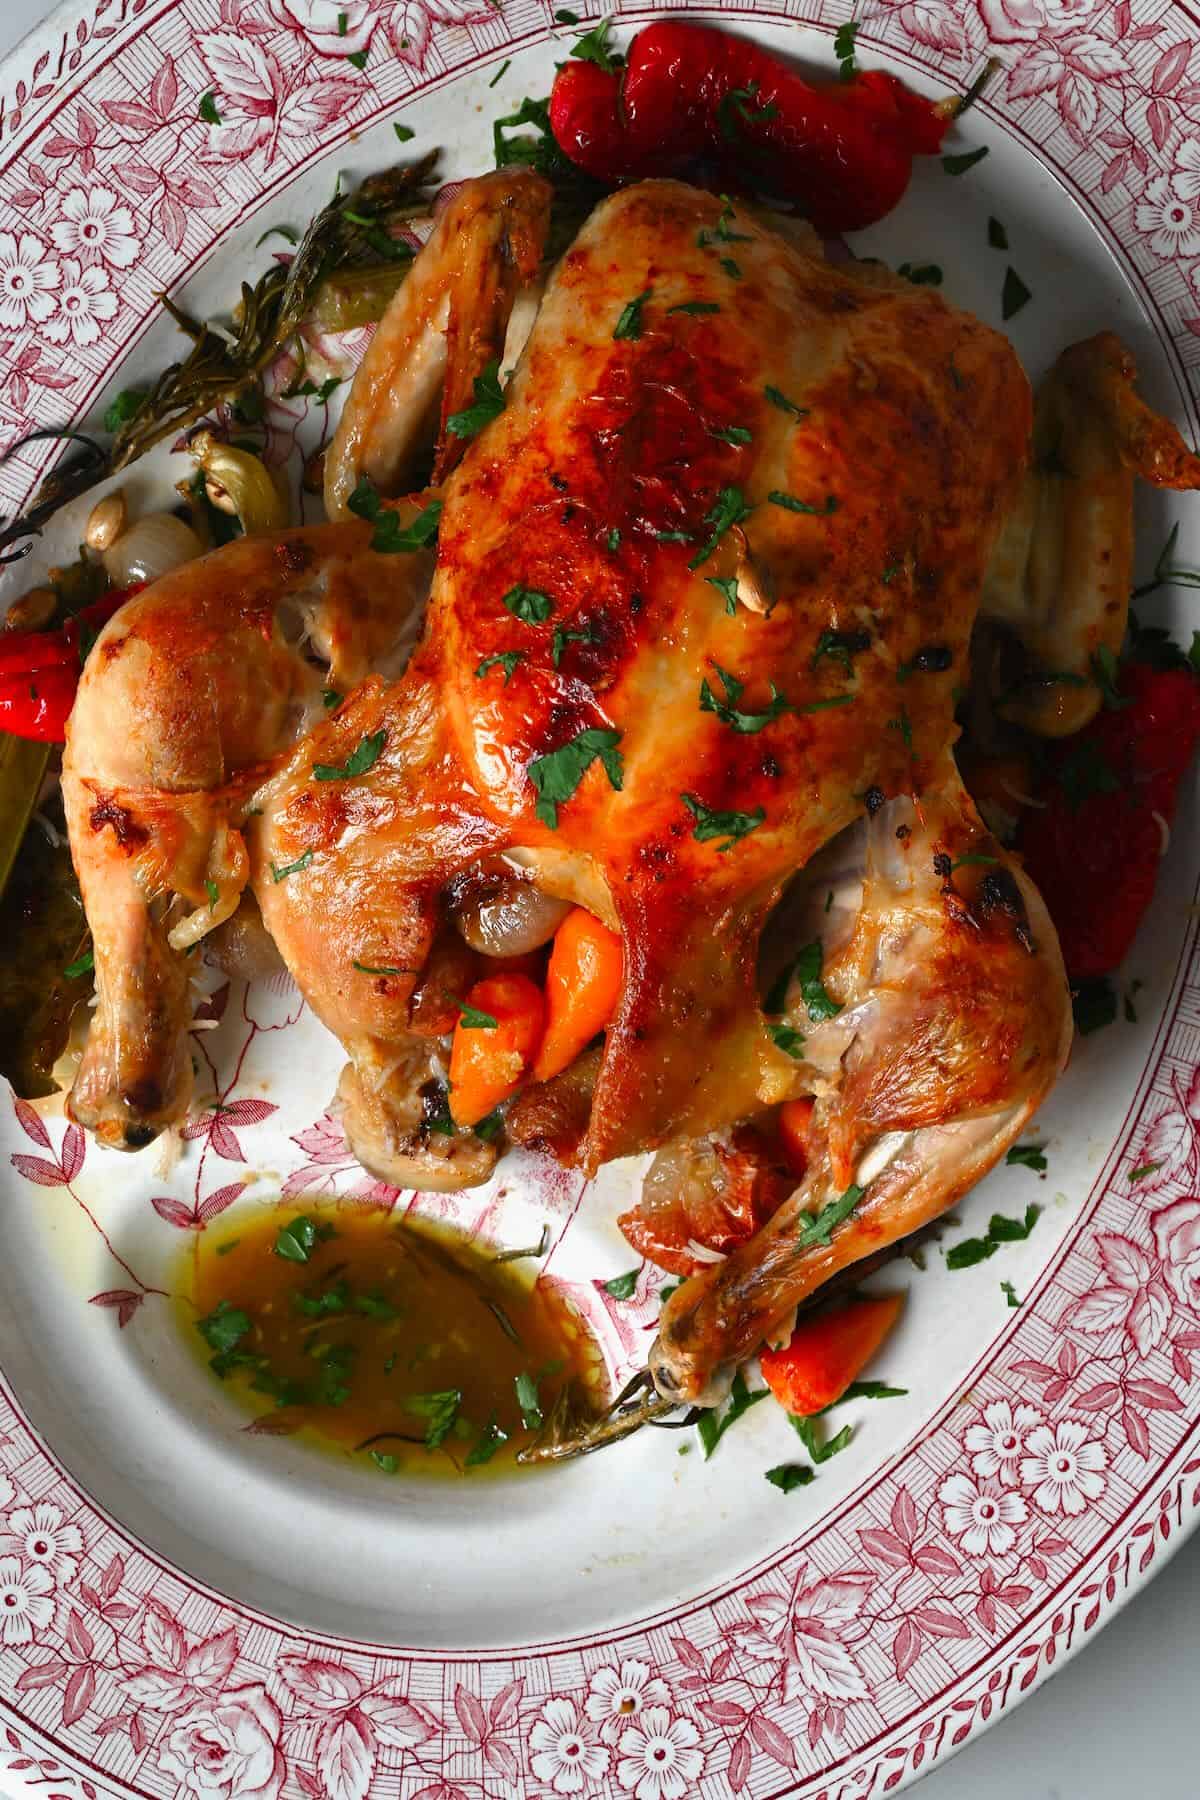 Roasted chicken served on a plate